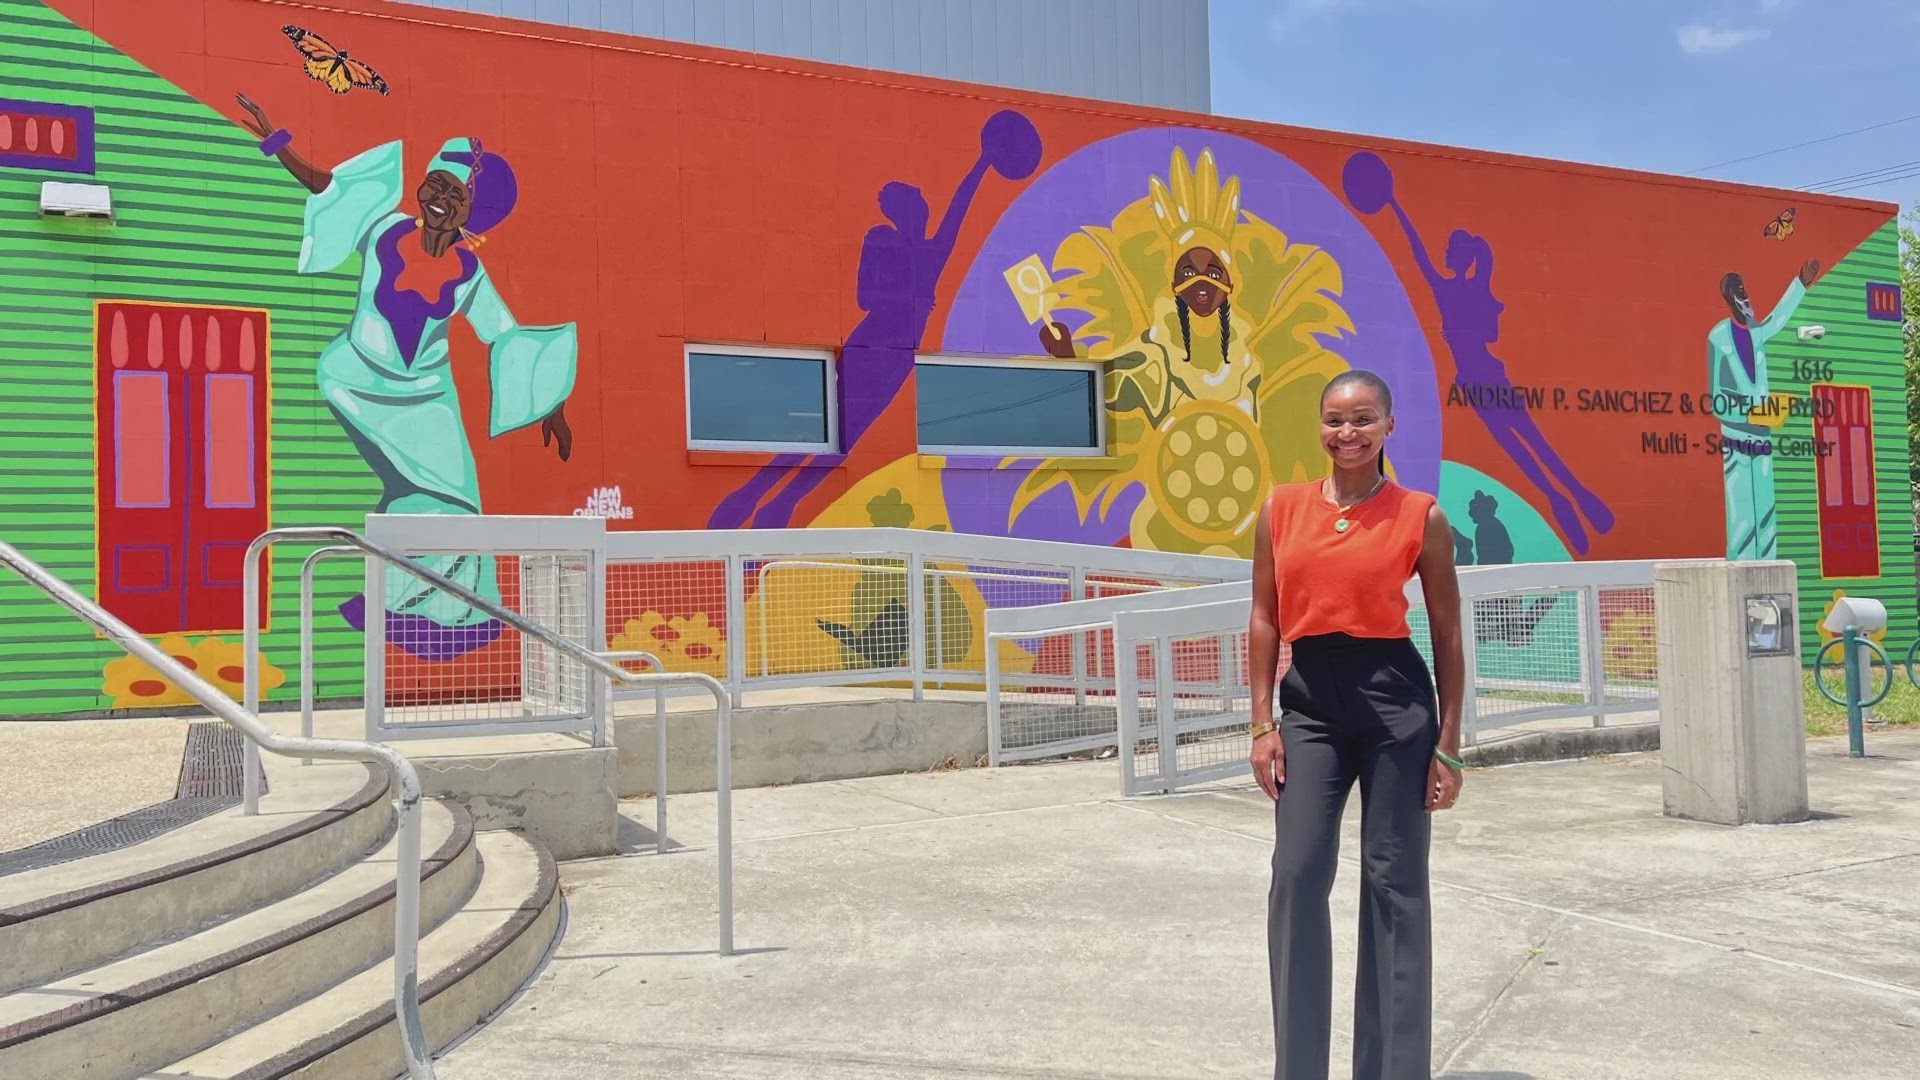 Young Black artist unveiled I Am New Orleans mural at Andrew P. Sanchez & Copelin-Byrd Multi-Service Center in the Lower 9th Ward